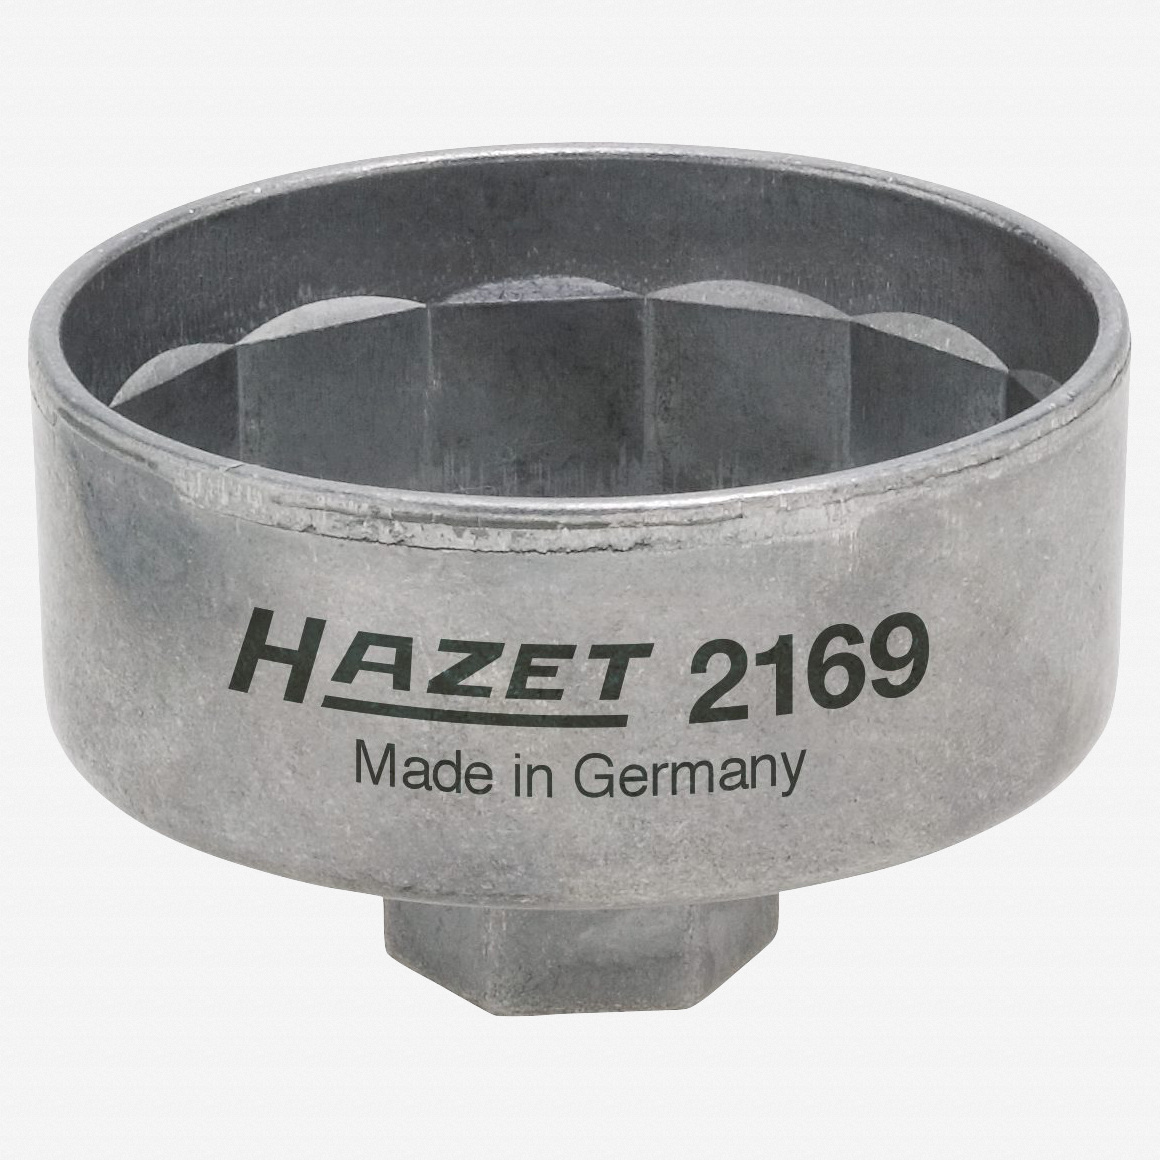 Hazet 2169 Oil filter wrench - Outside 14-point profile - KC Tool